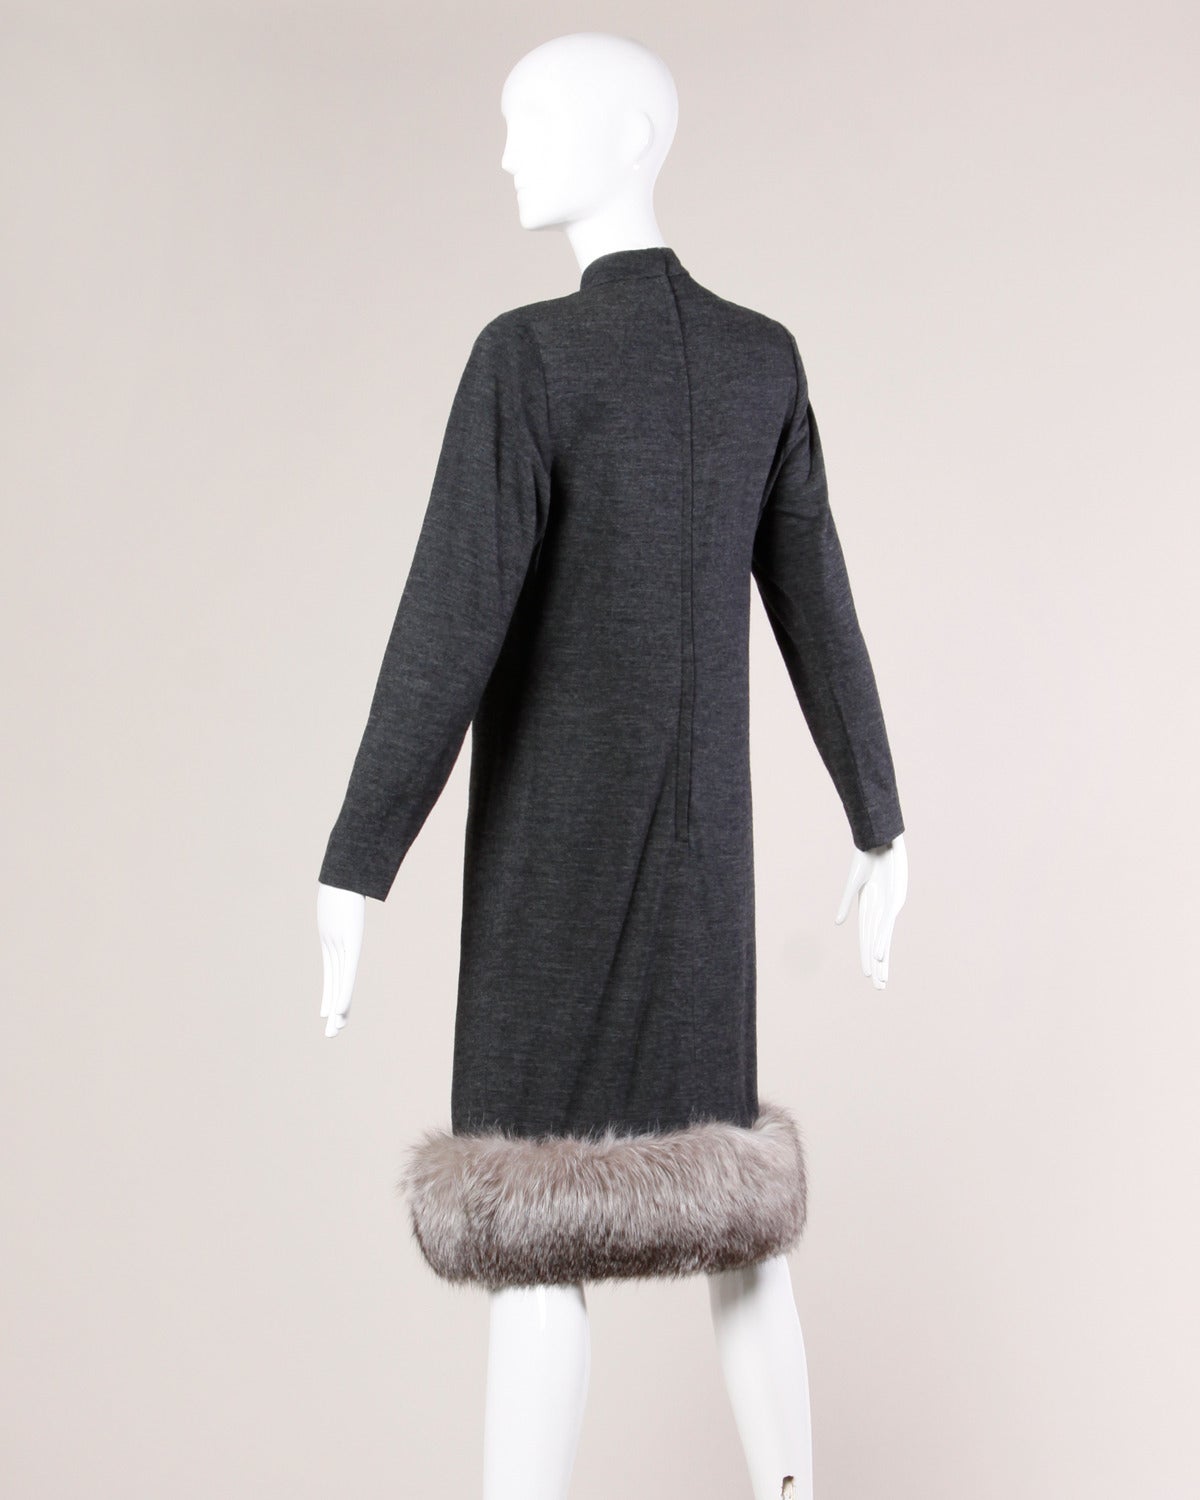 Black Victor Costa for Saks Fifth Avenue Vintage Wool Dress with Fox Fur Trim